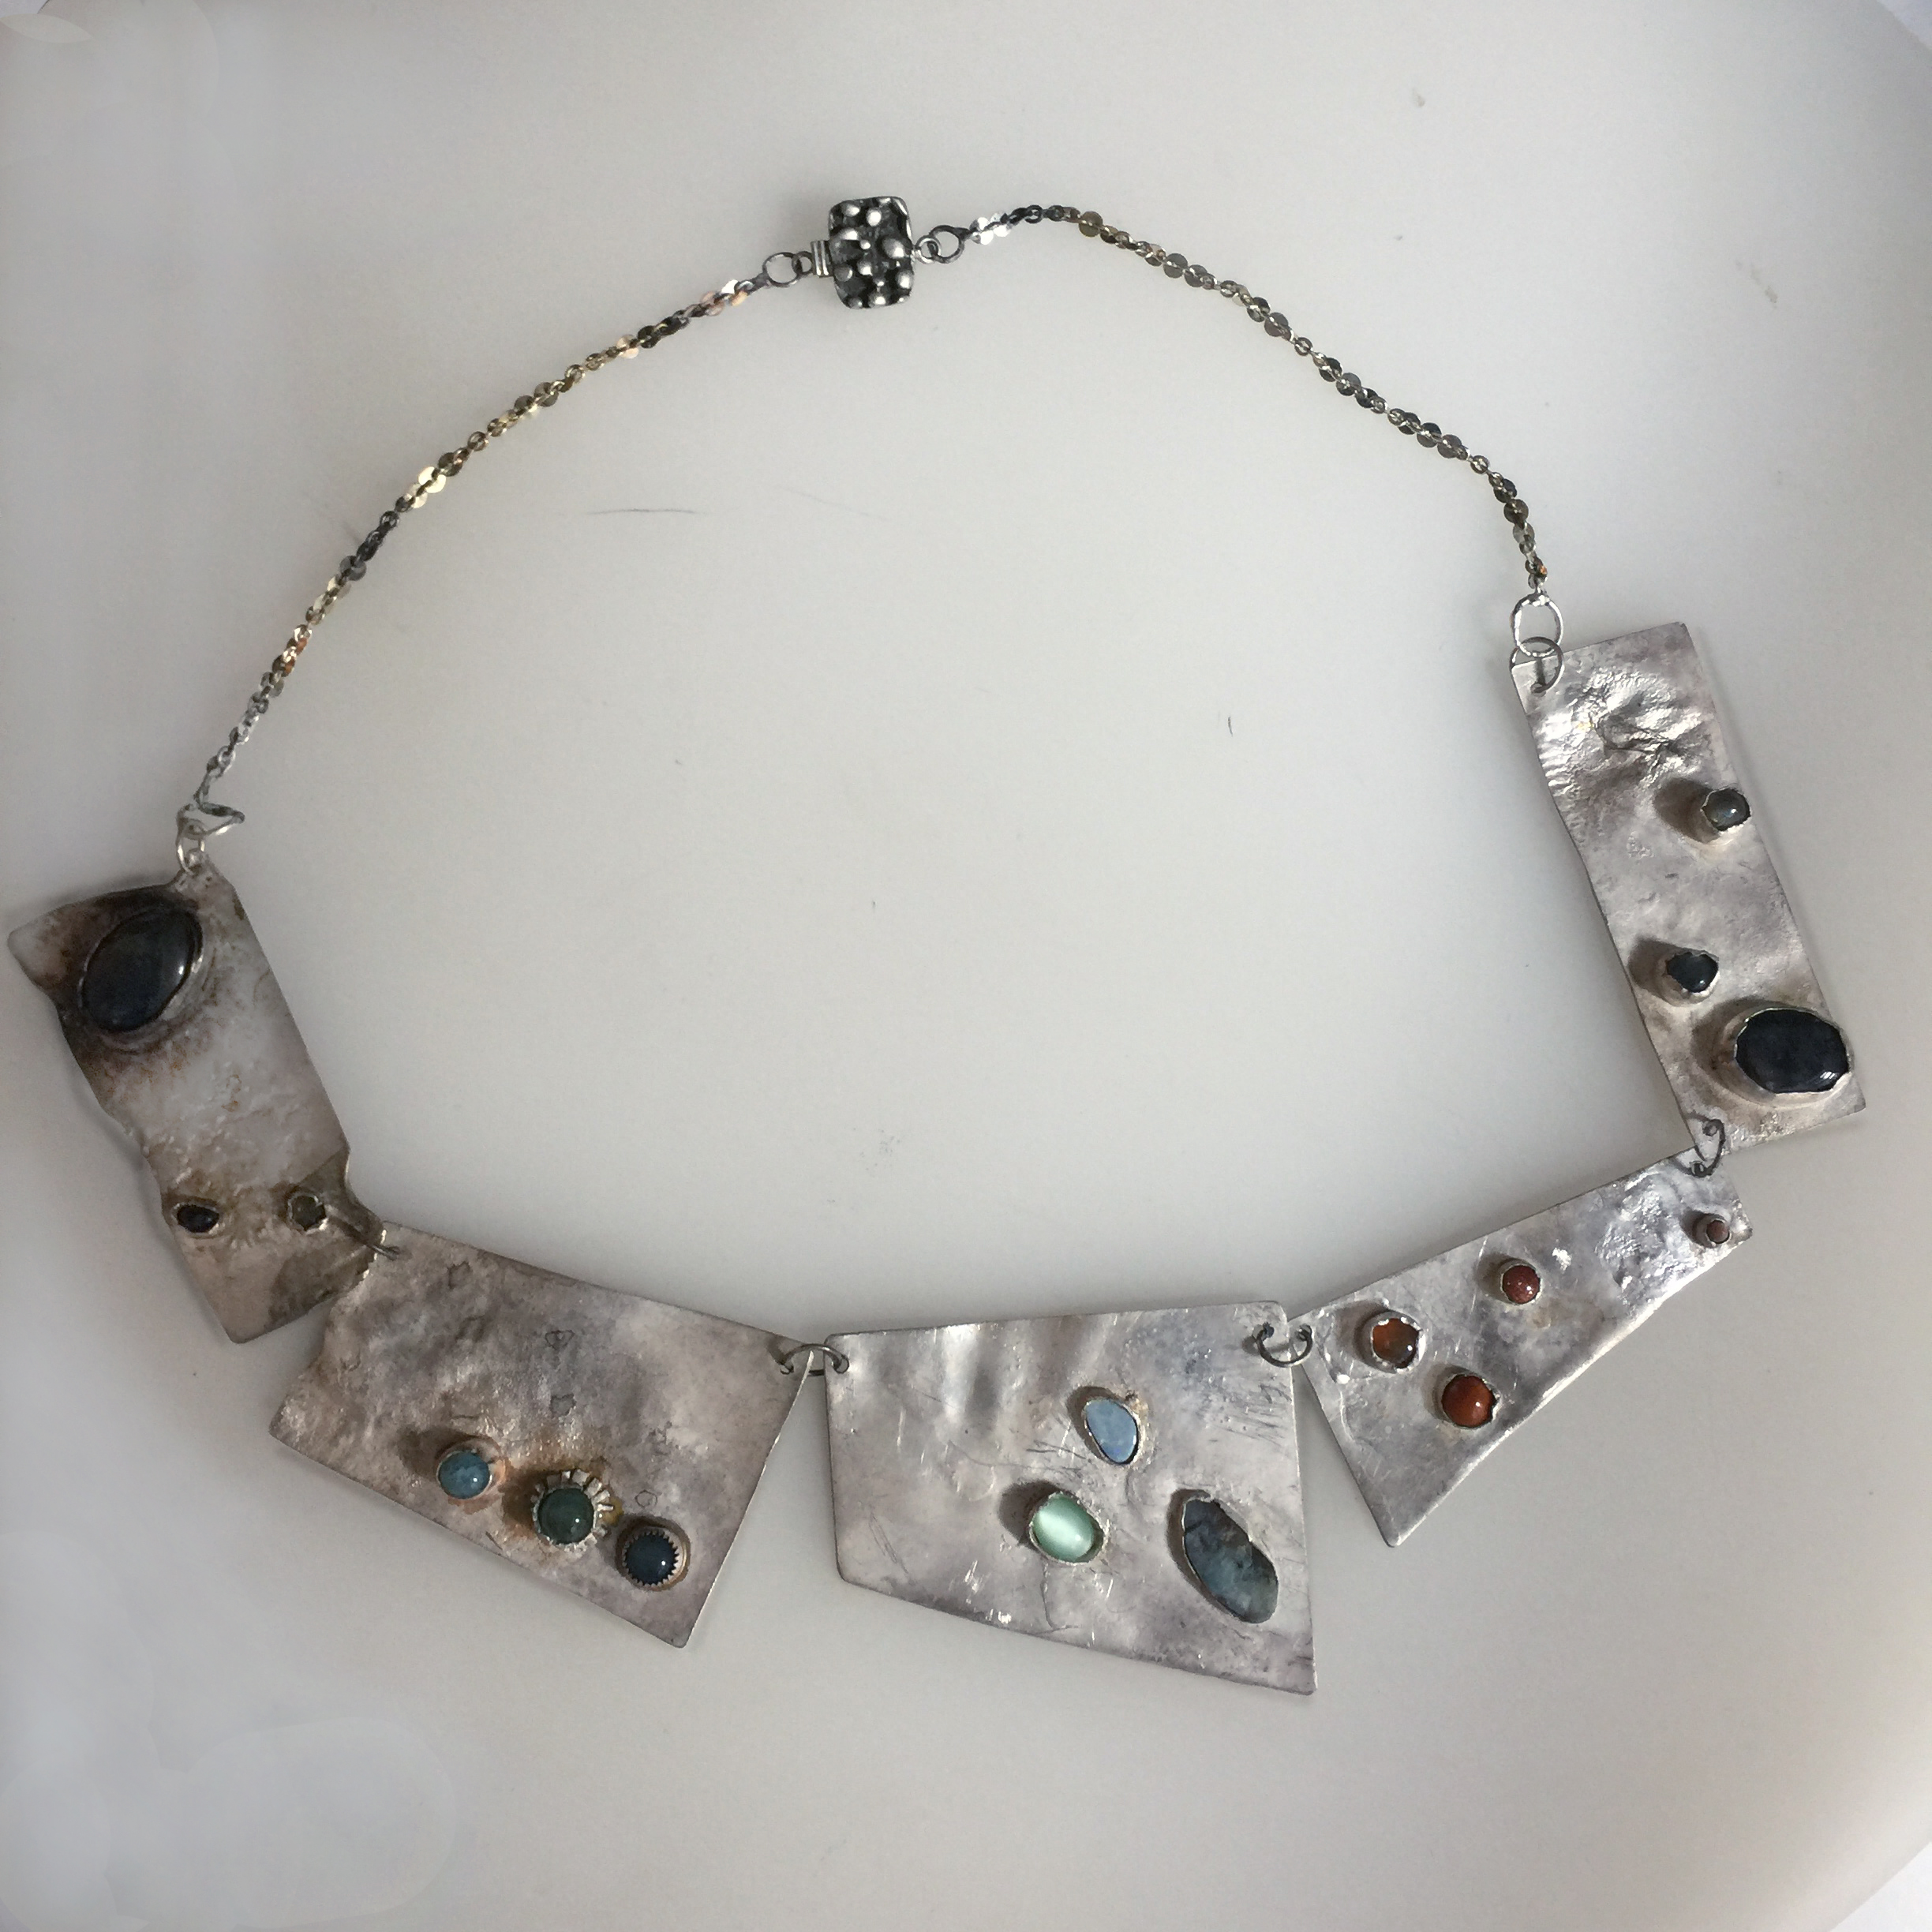 Panel Necklace- $795